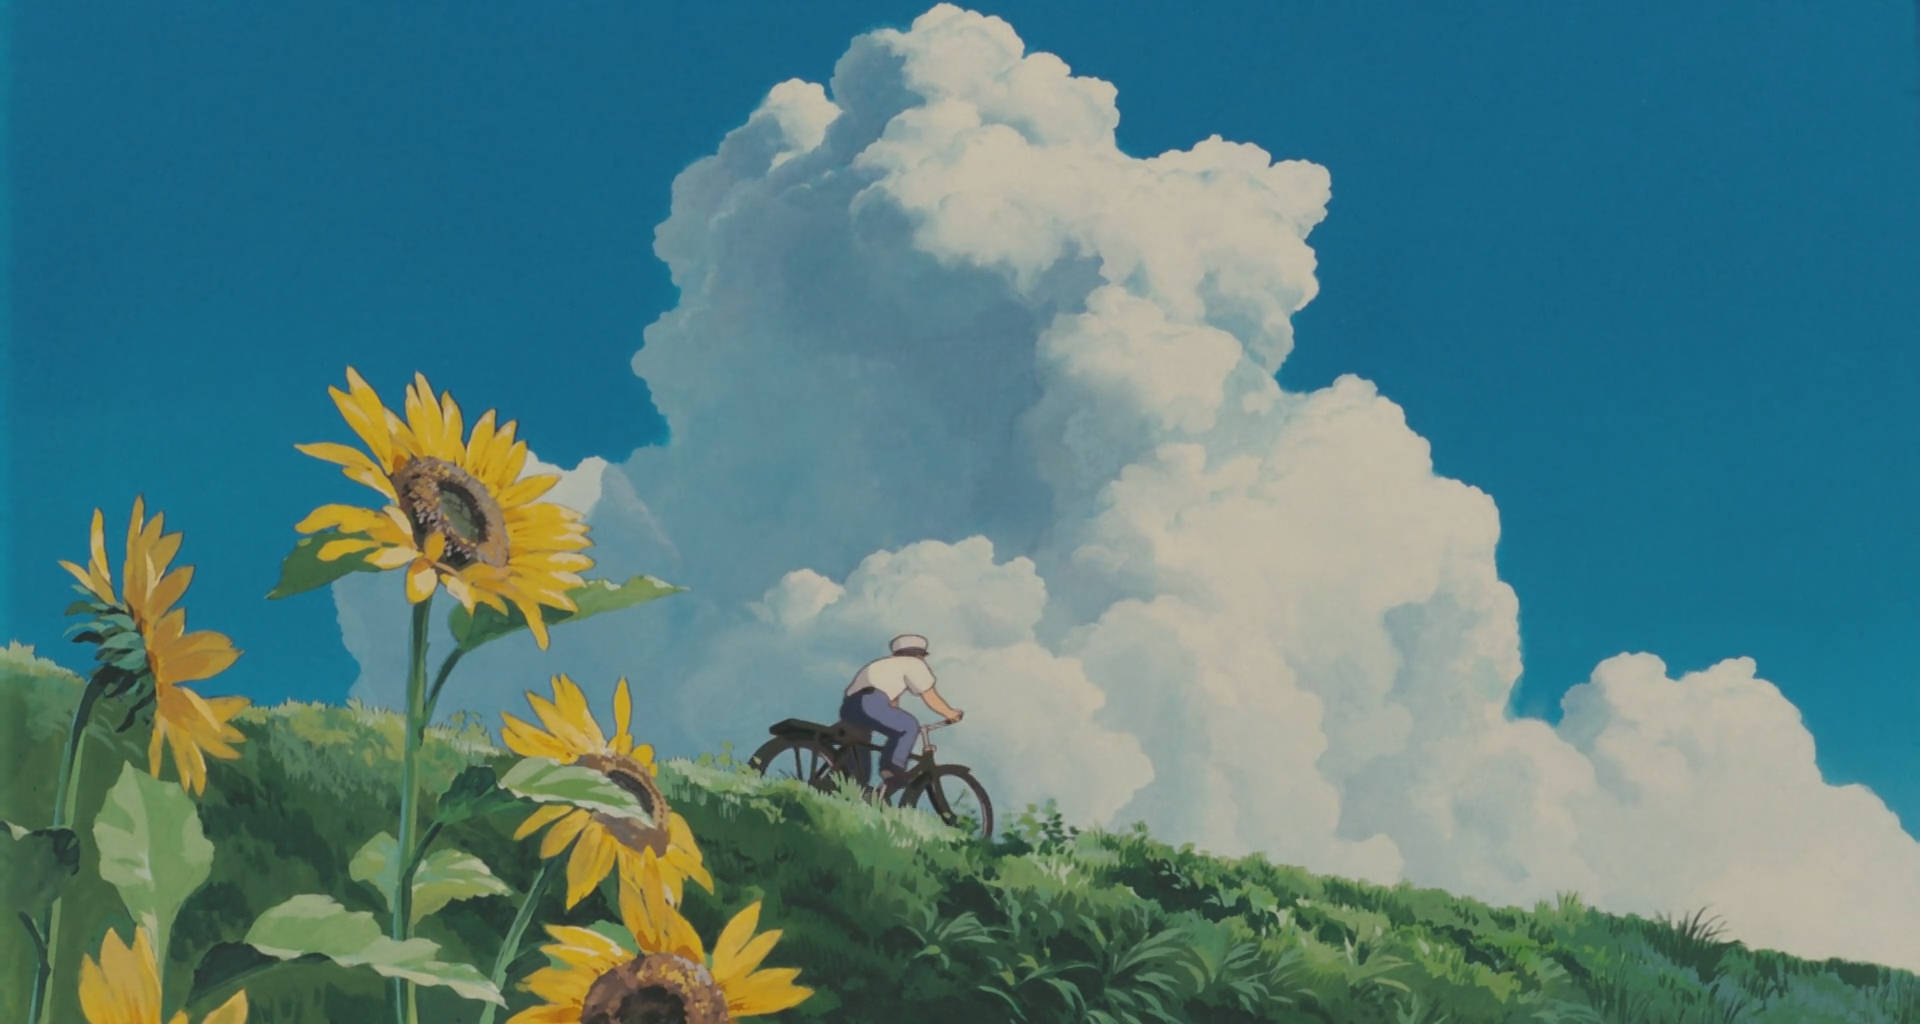 Tranquil Studio Ghibli Scenery With Blooming Sunflowers Background